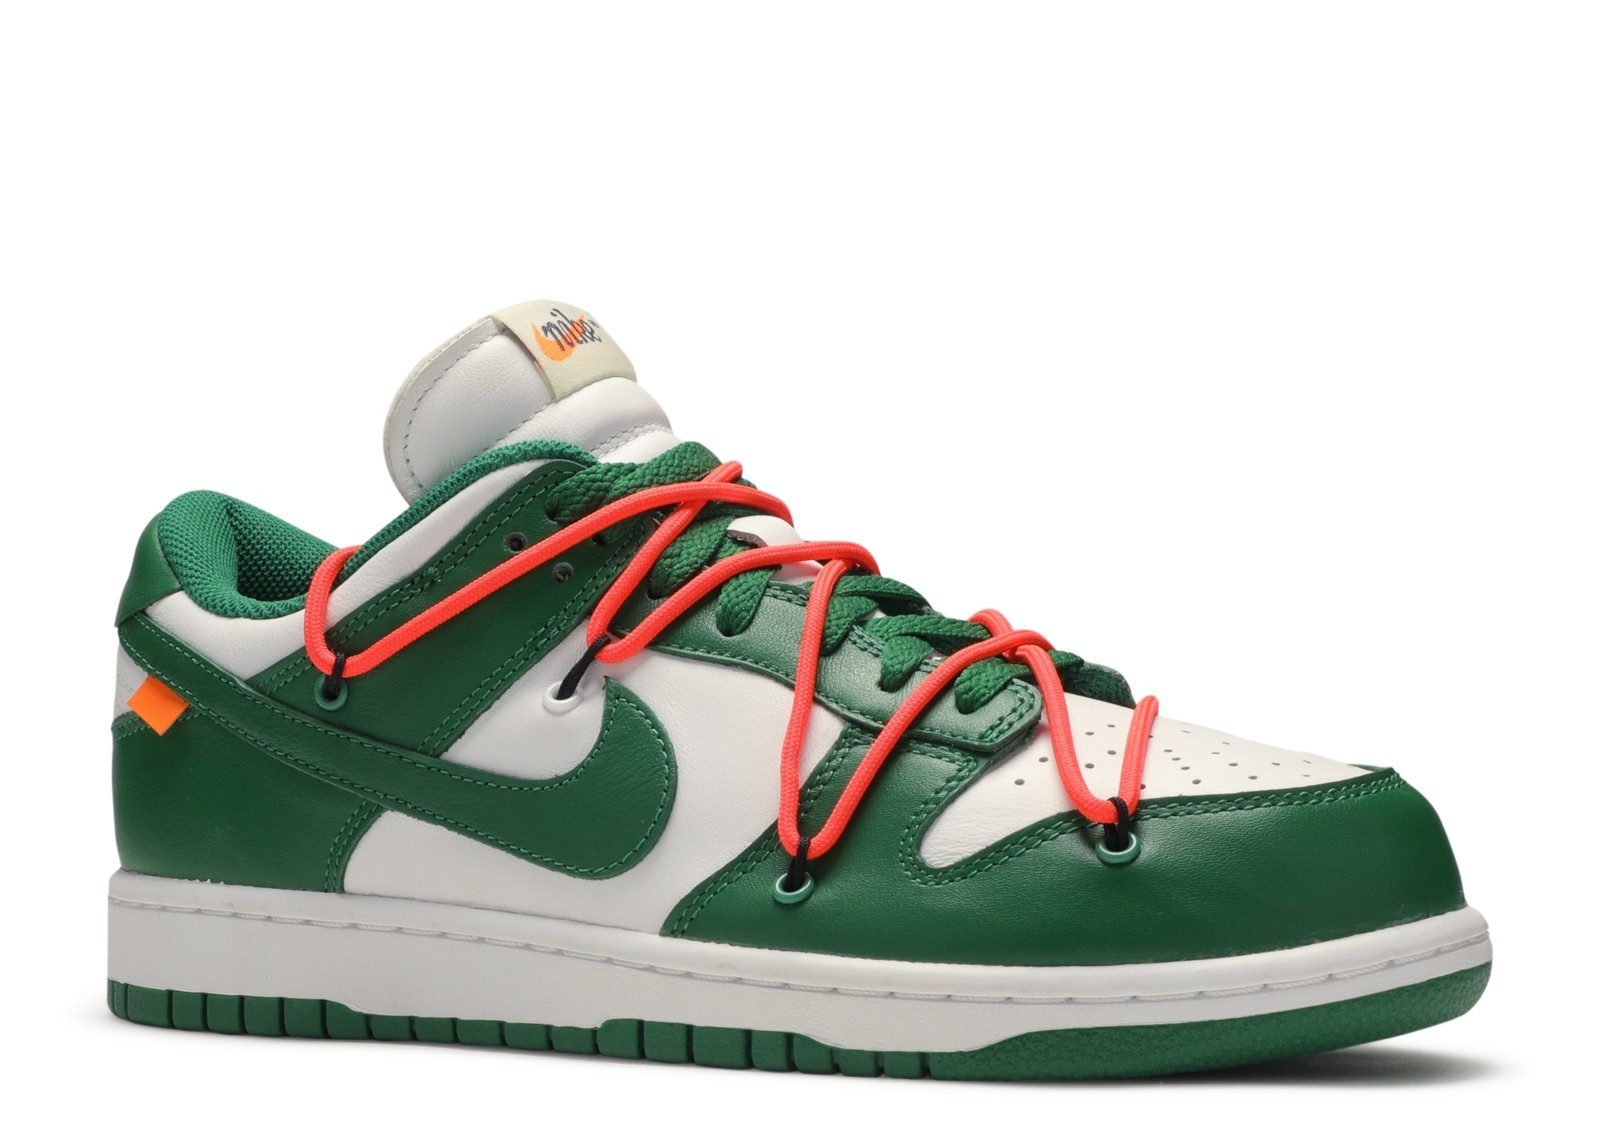 Dunk Low “Off White - Pine Green” image 2